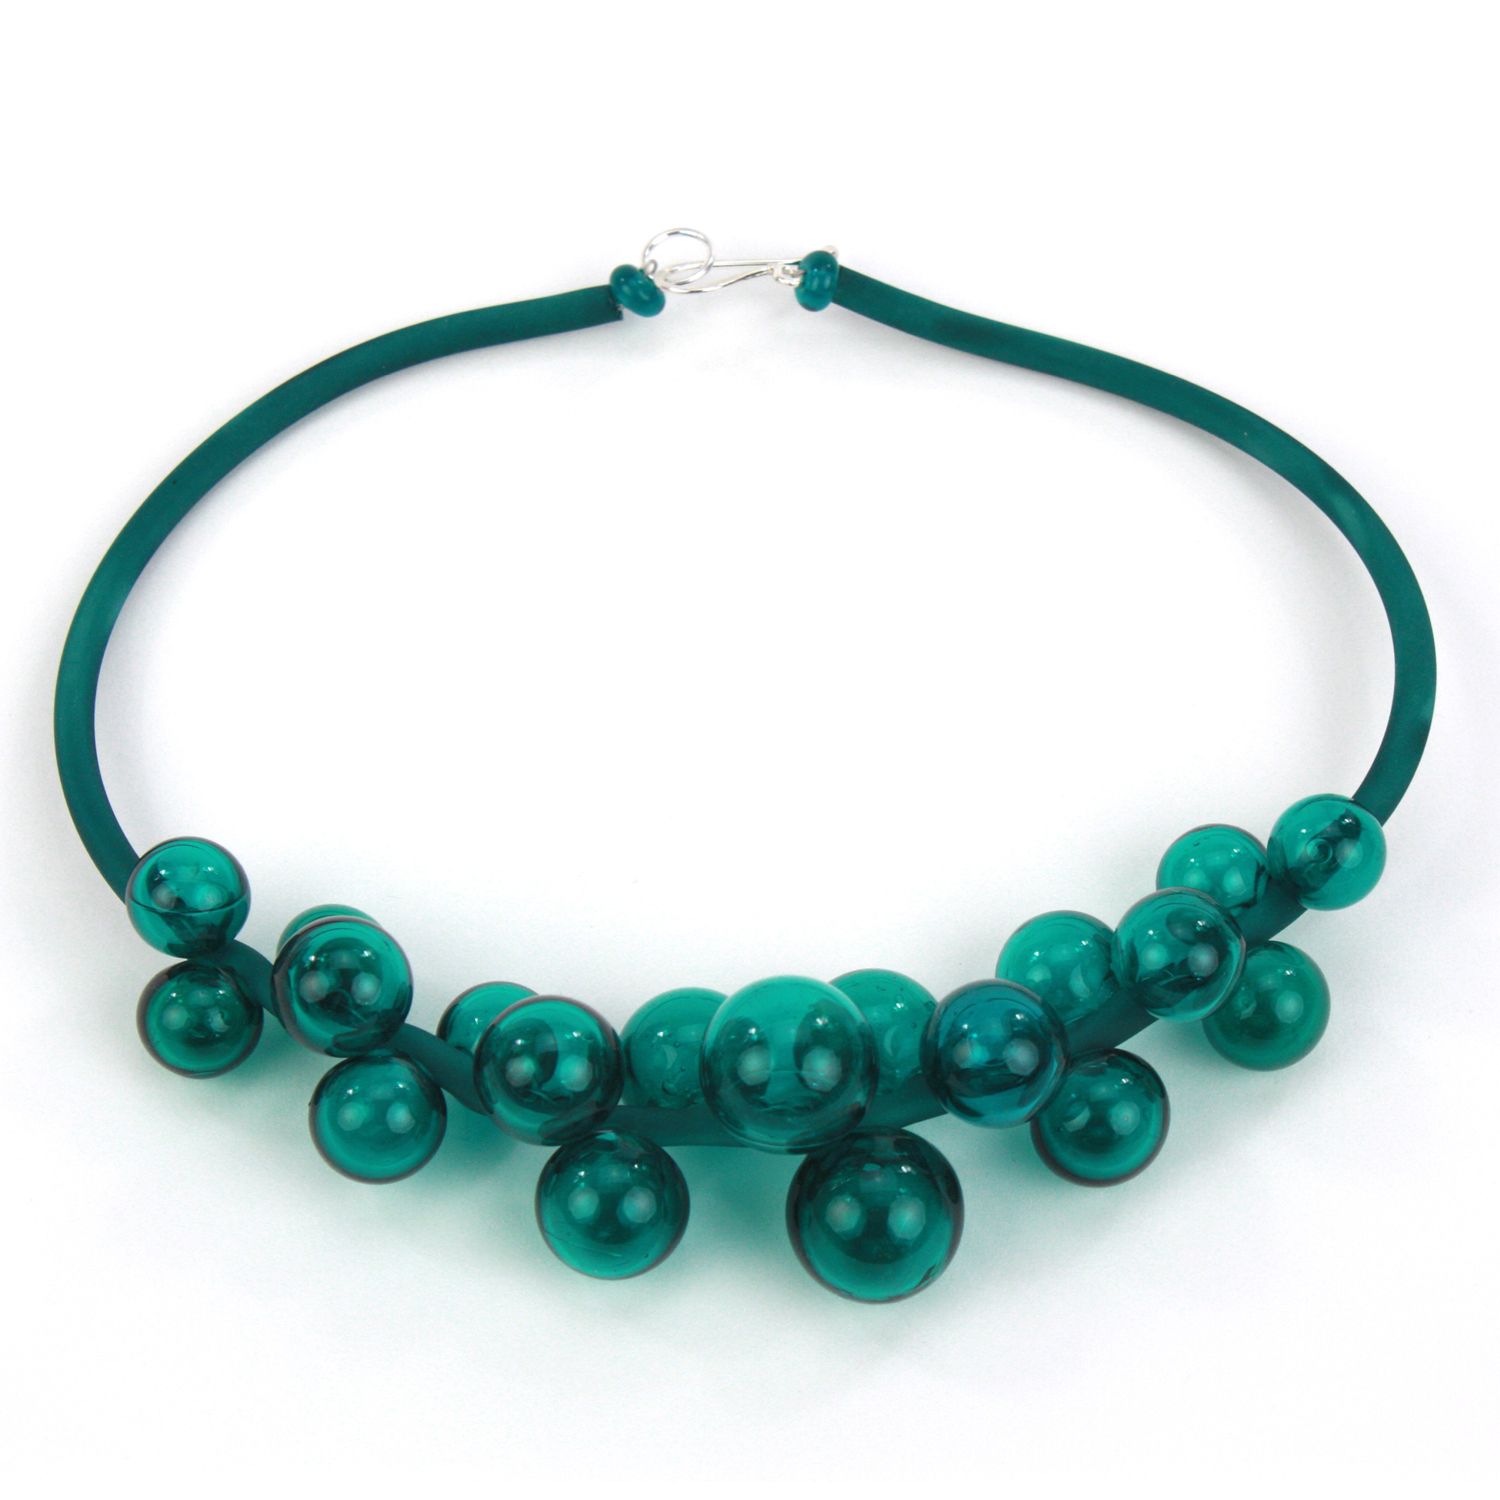 Alicia Niles: Chroma Bola Necklace – Teal Product Image 2 of 3